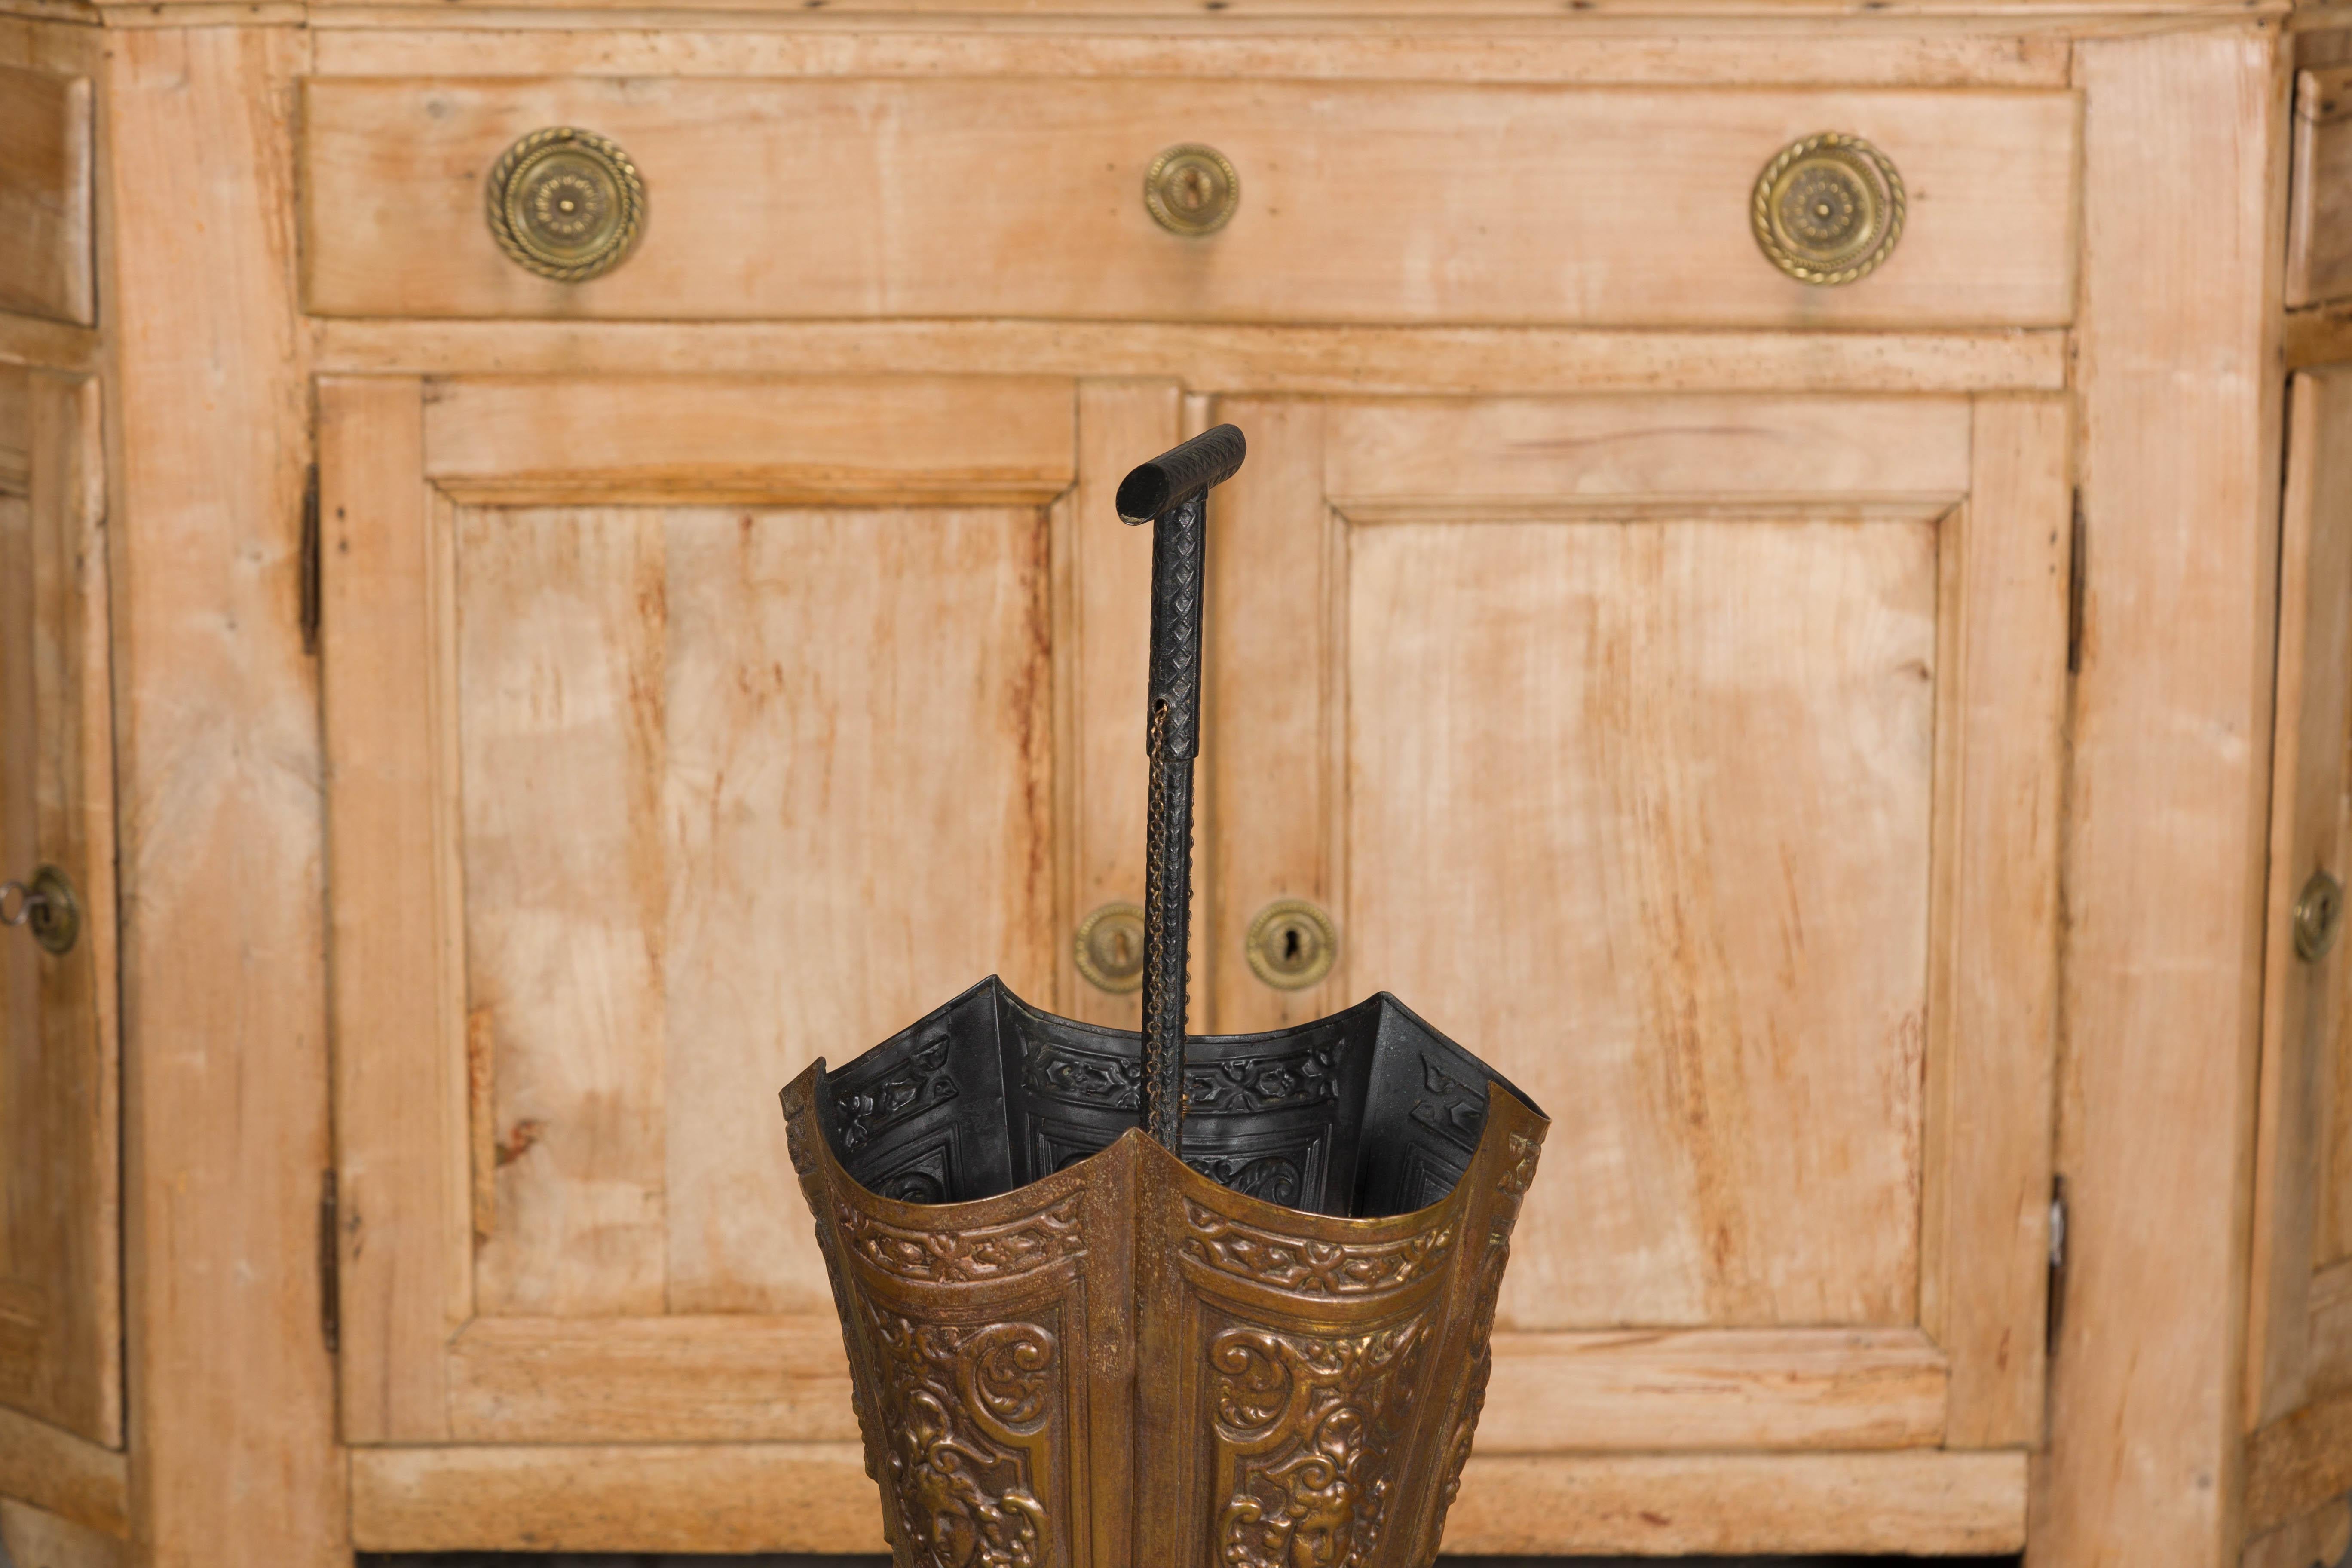 English 1920-1930 Brass Umbrella Stand with Raised Motifs and Tripartite Base For Sale 1